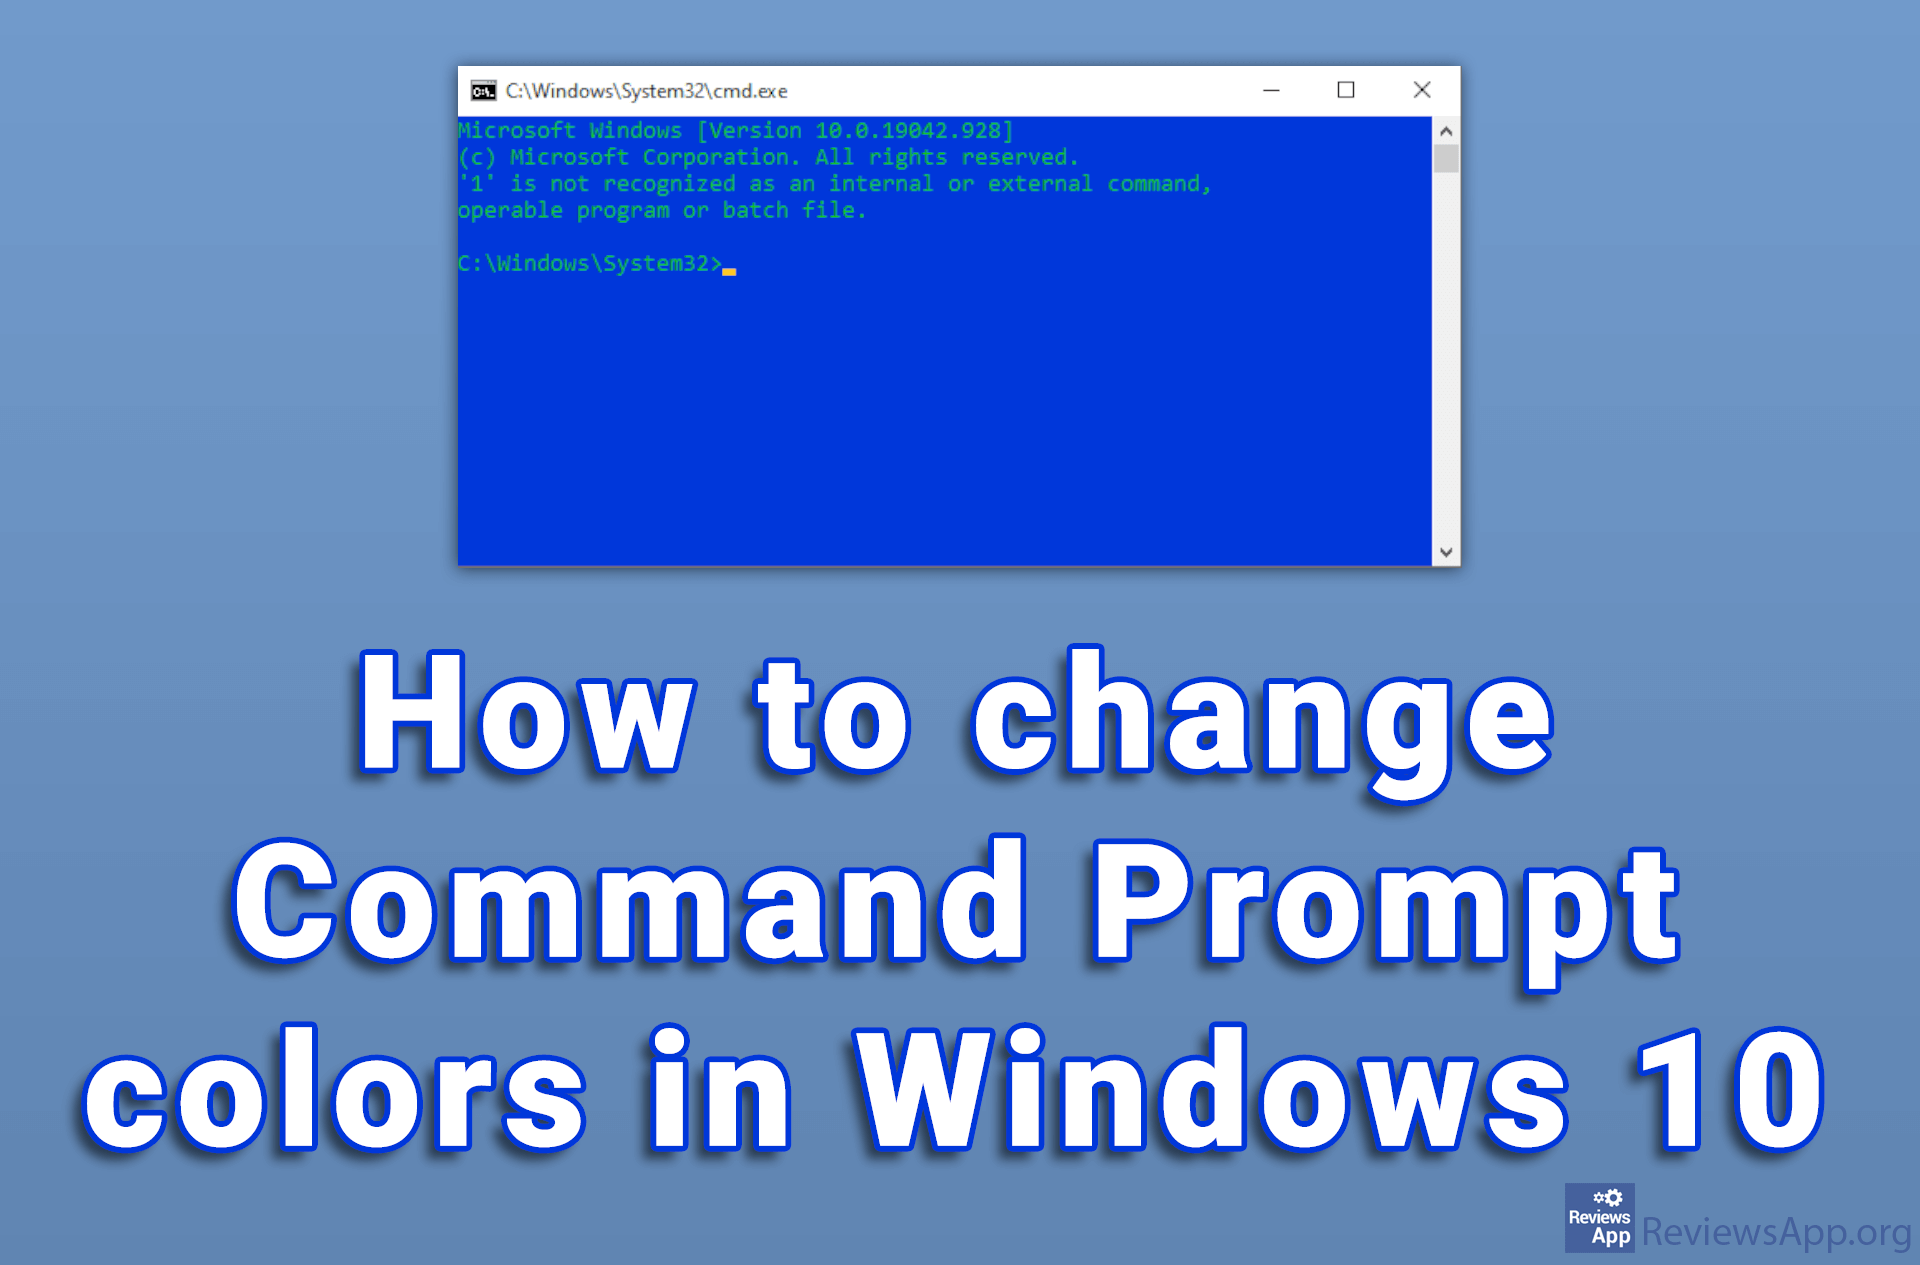 How to change Command Prompt colors in Windows 10